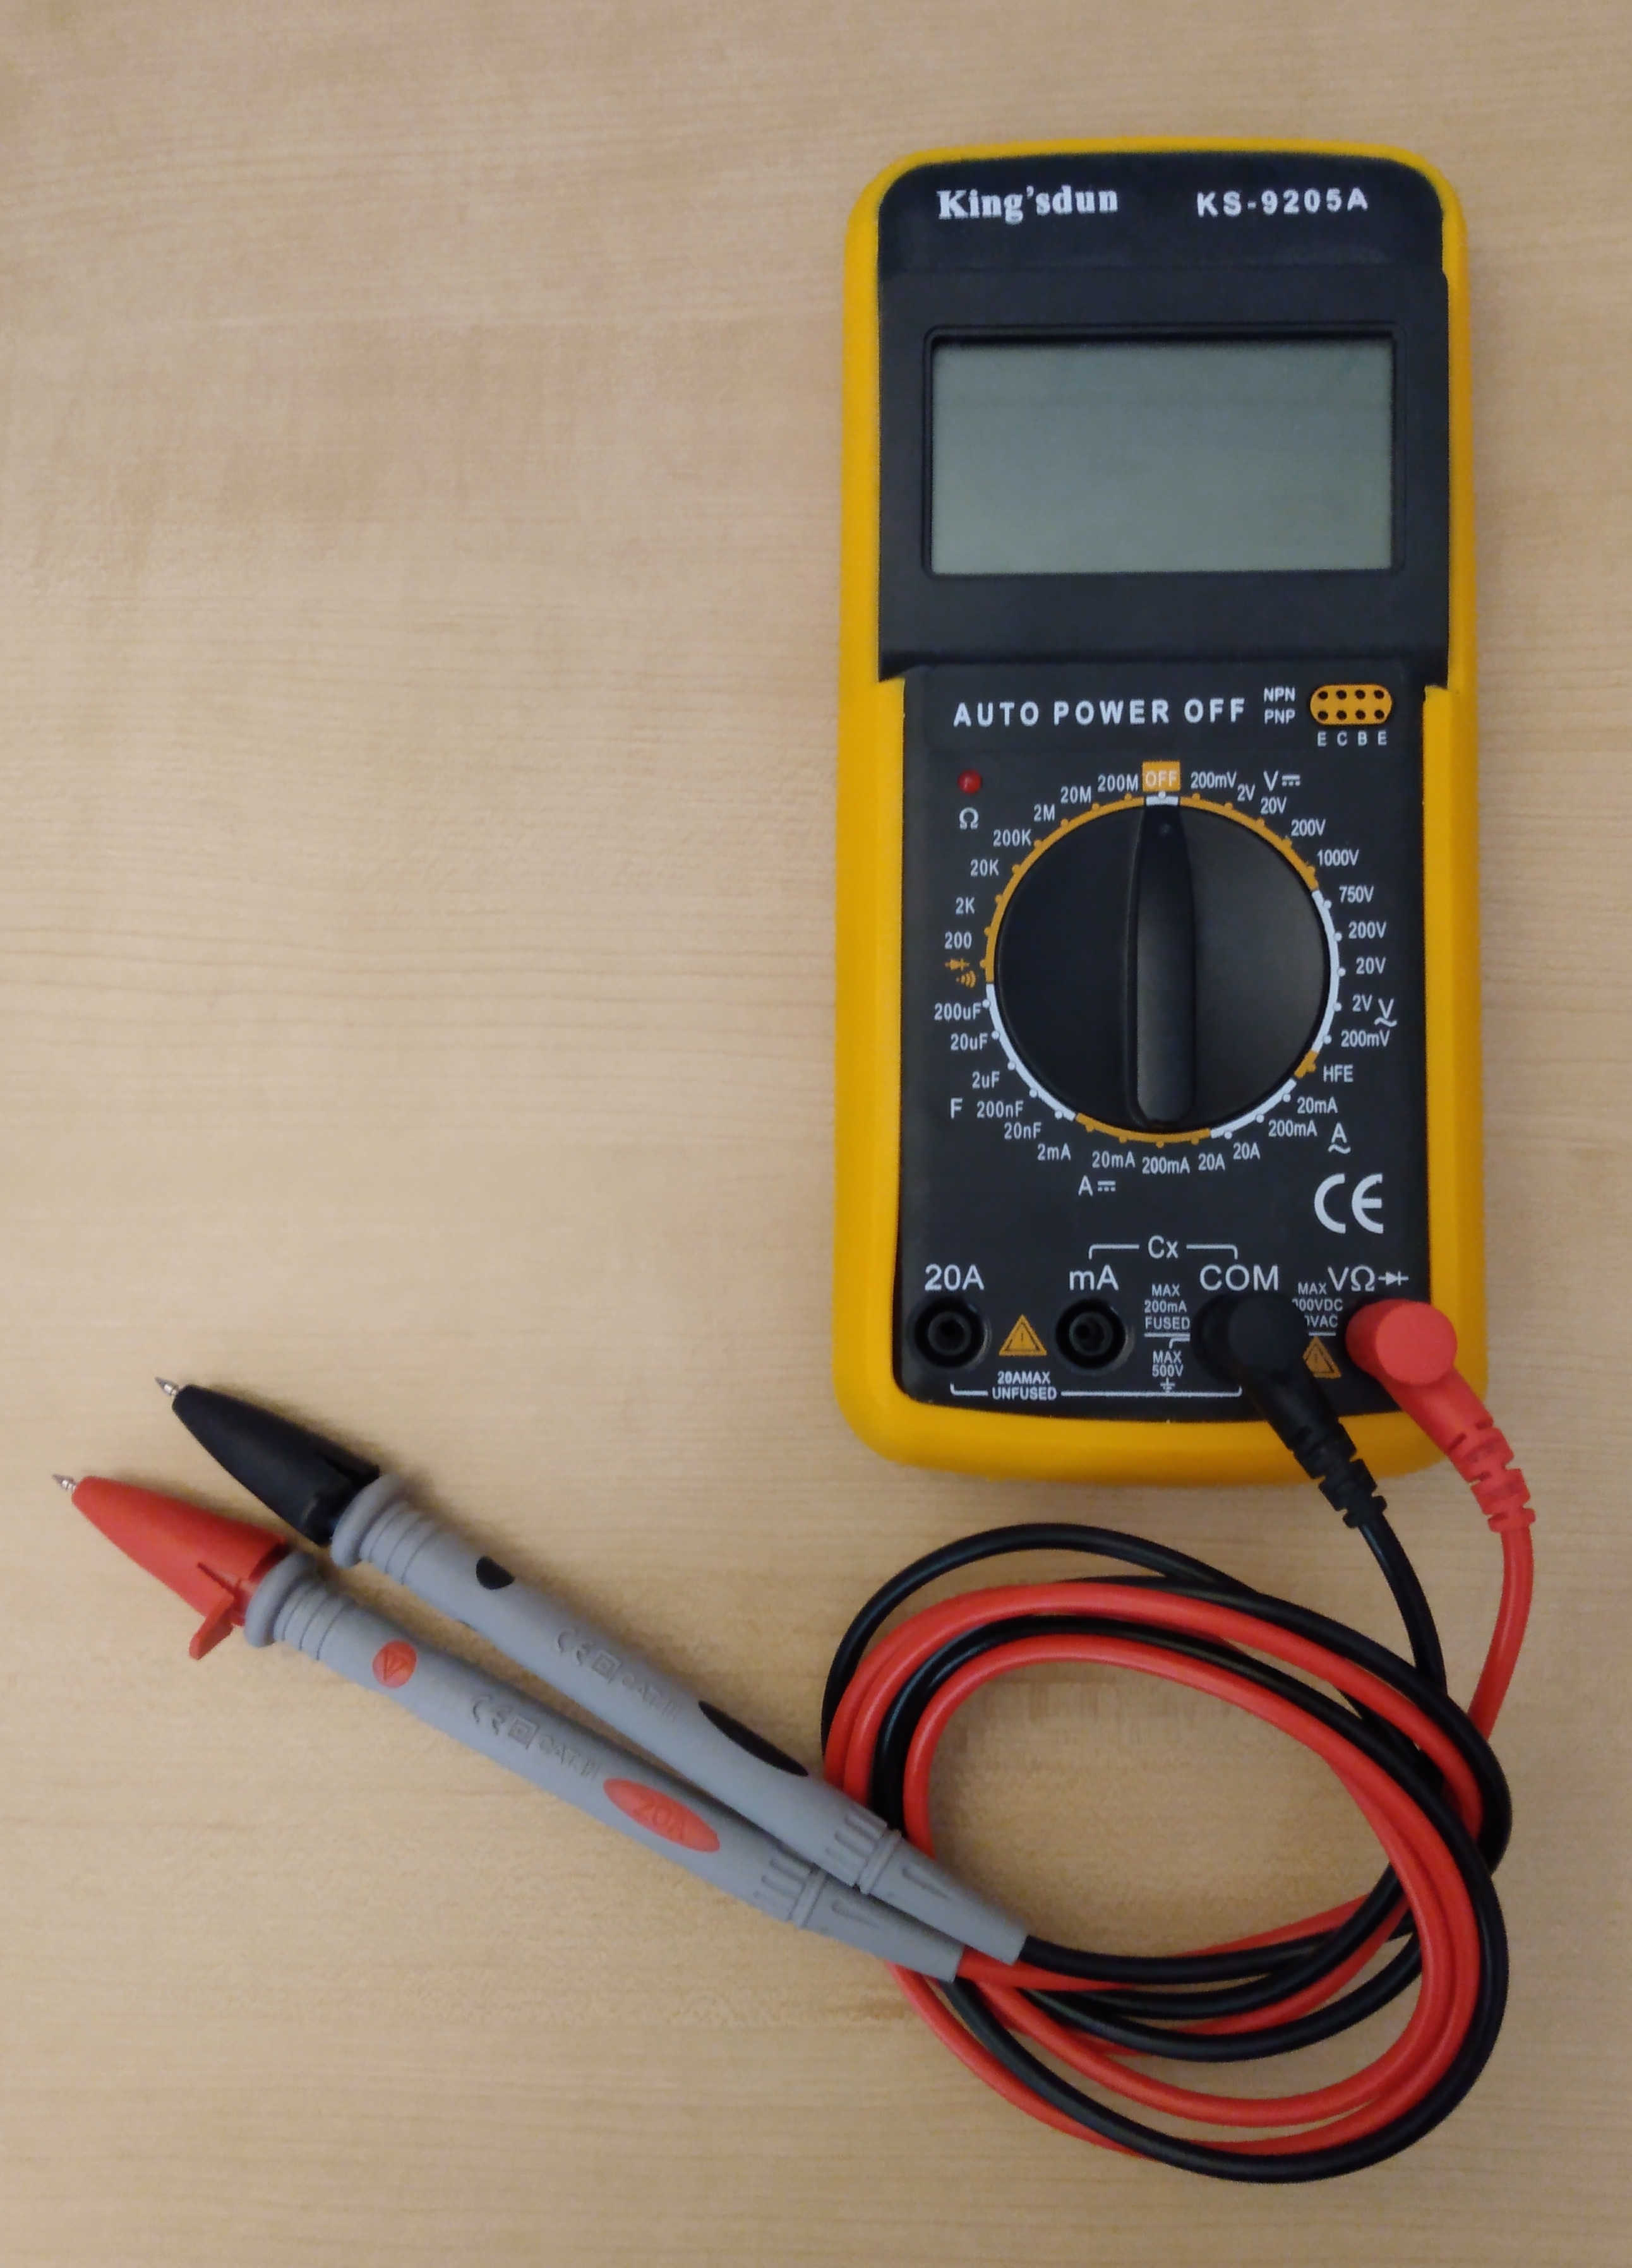 A “King’sdun” multimeter, with leads